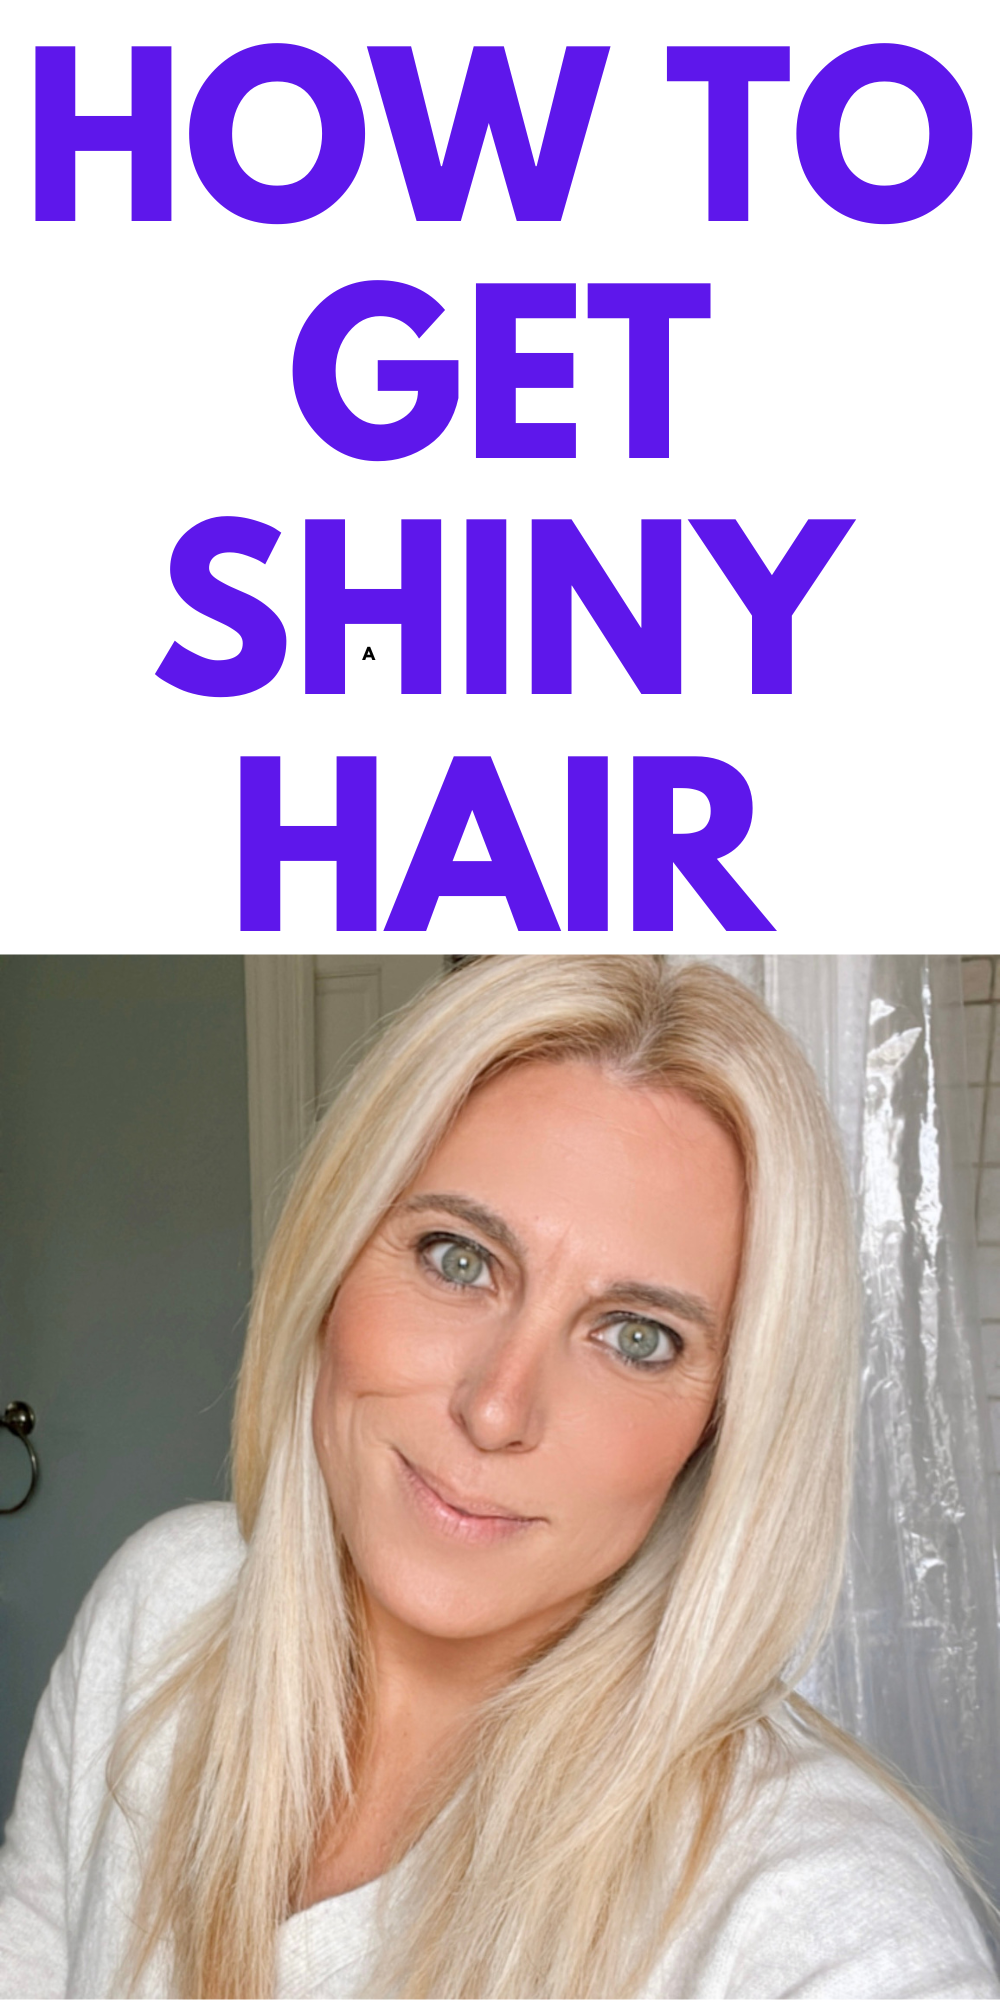 How To Get Shiny Hair - Stylish Life for Moms